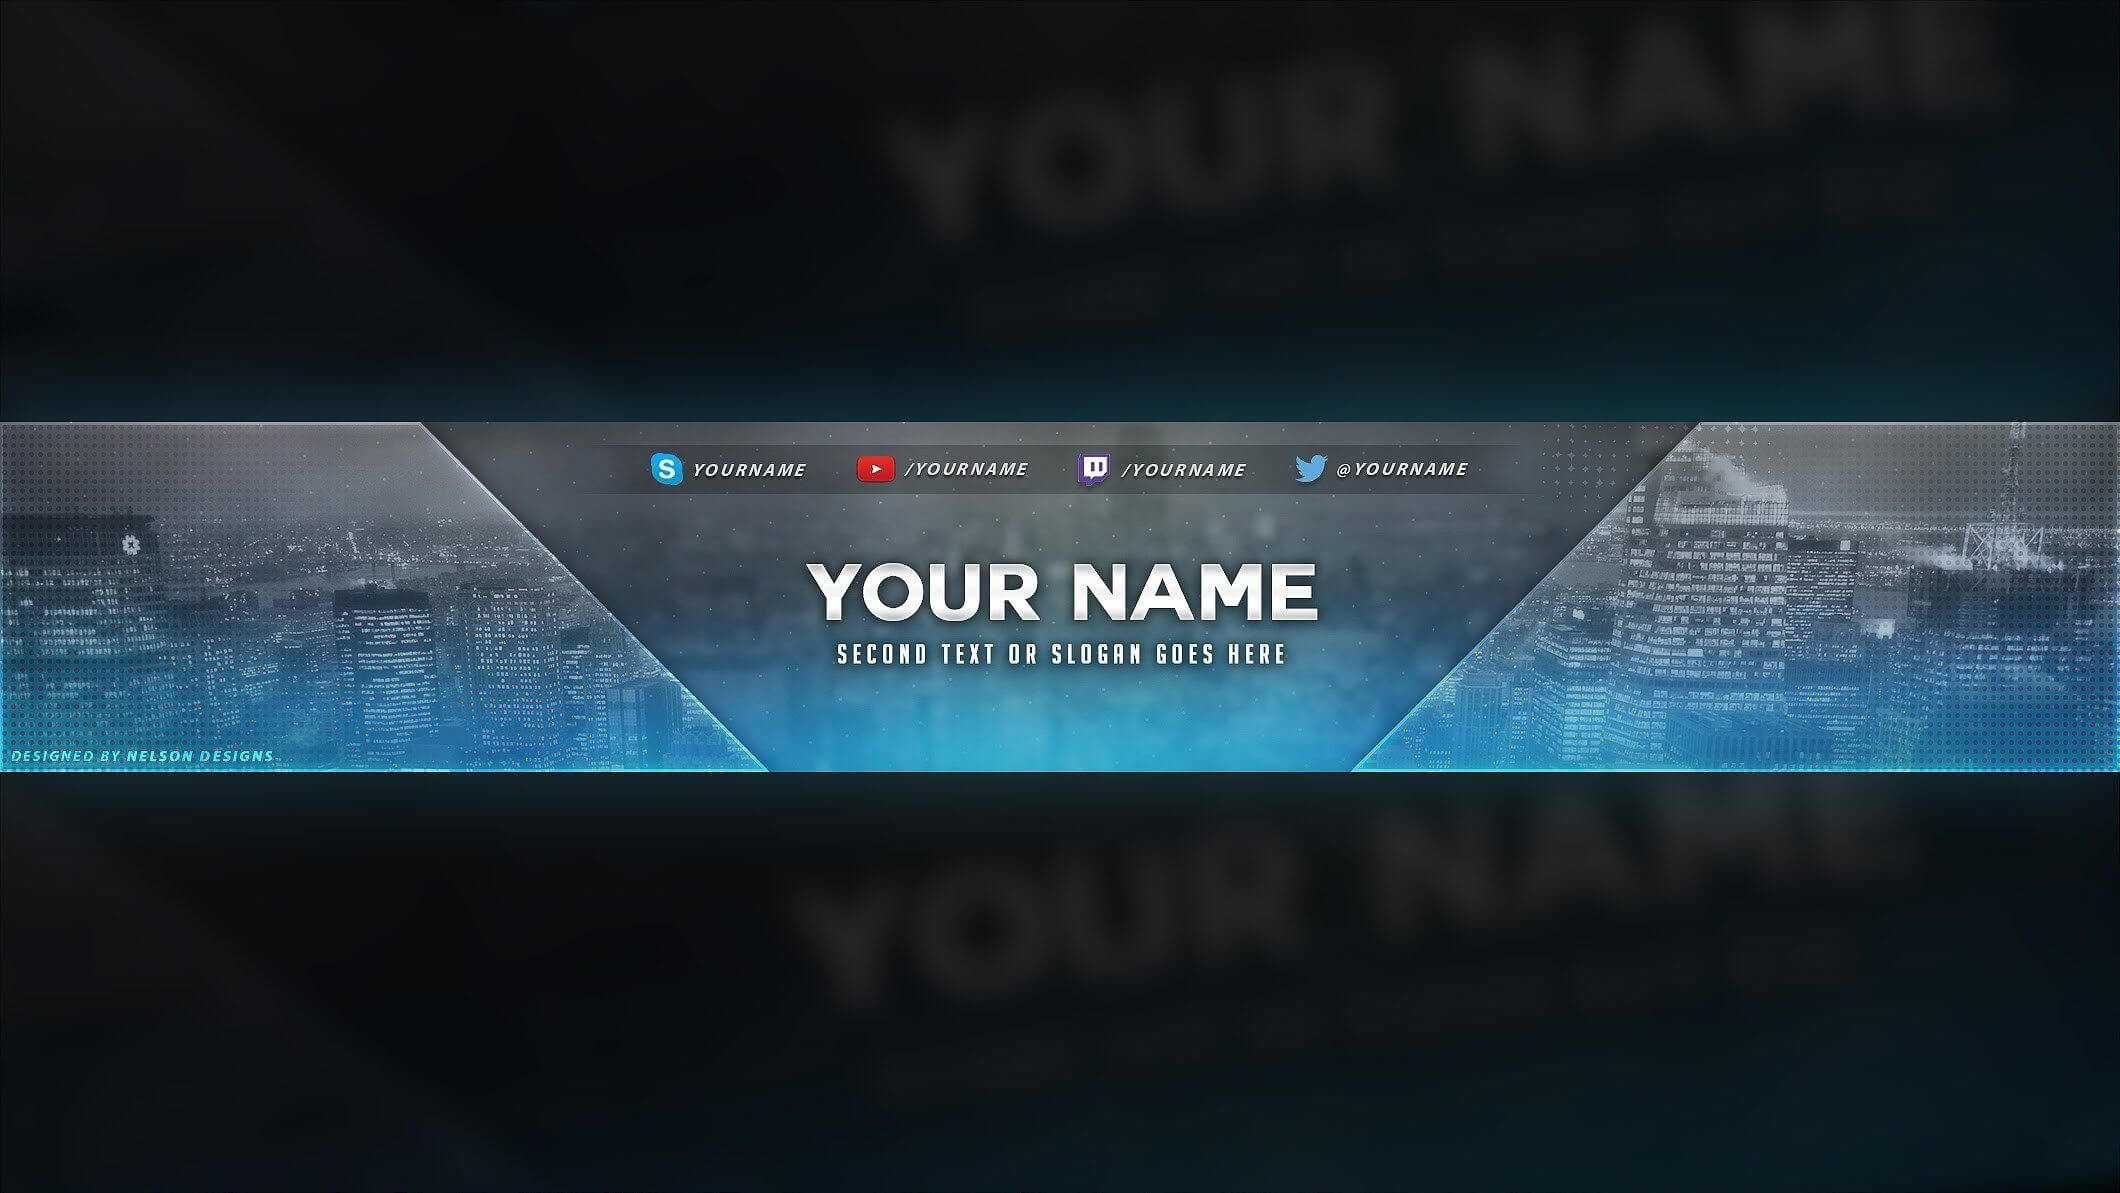 youtube banner template photoshop download free